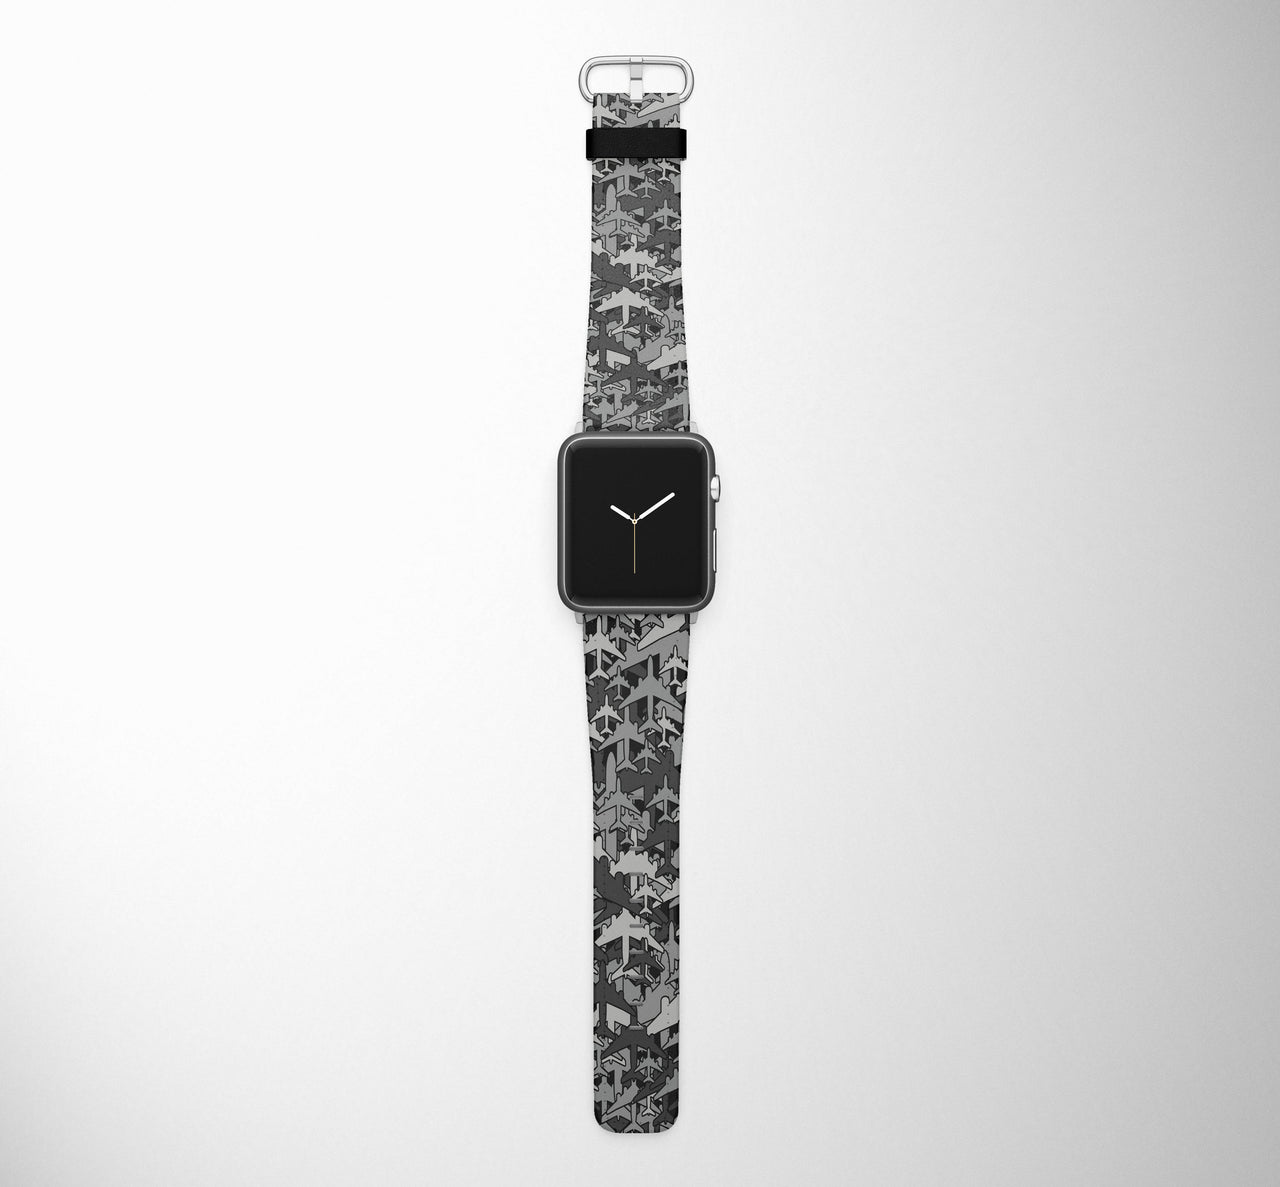 Dark Coloured Seamless Airplanes Designed Leather Apple Watch Straps